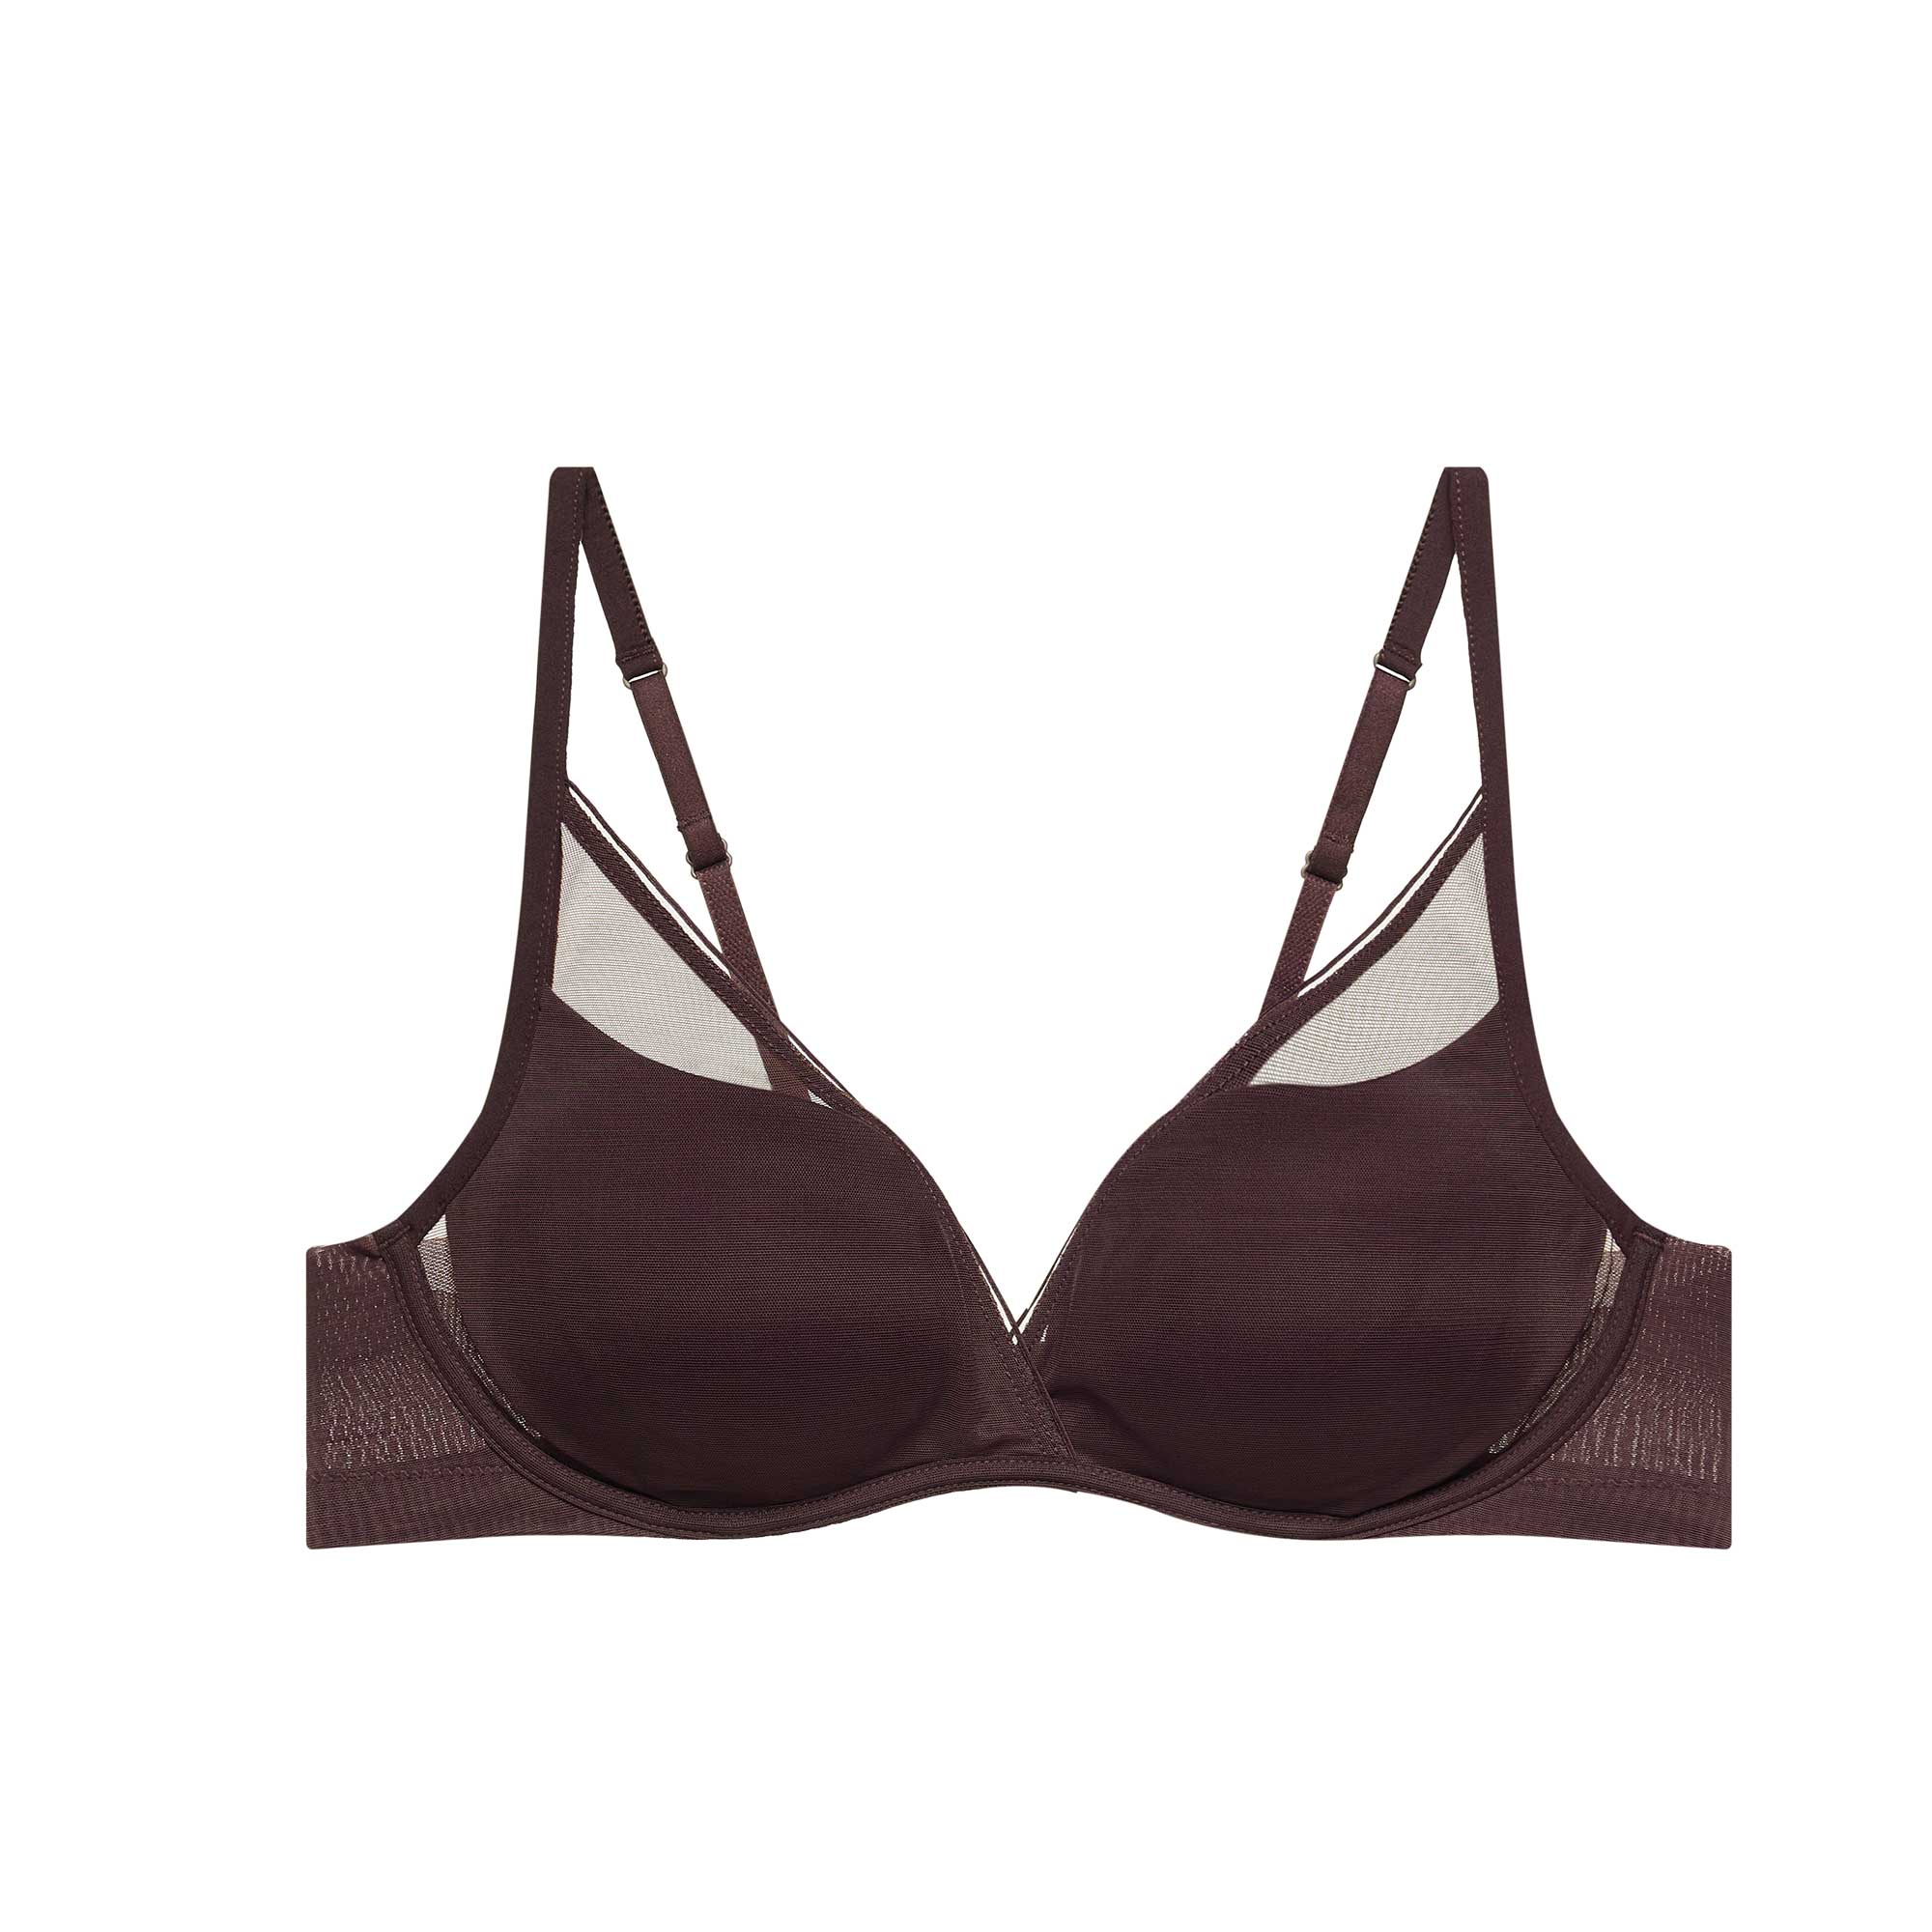 Flat lay image of a brown bra with mesh overlay, plunge neckline, and thin straps